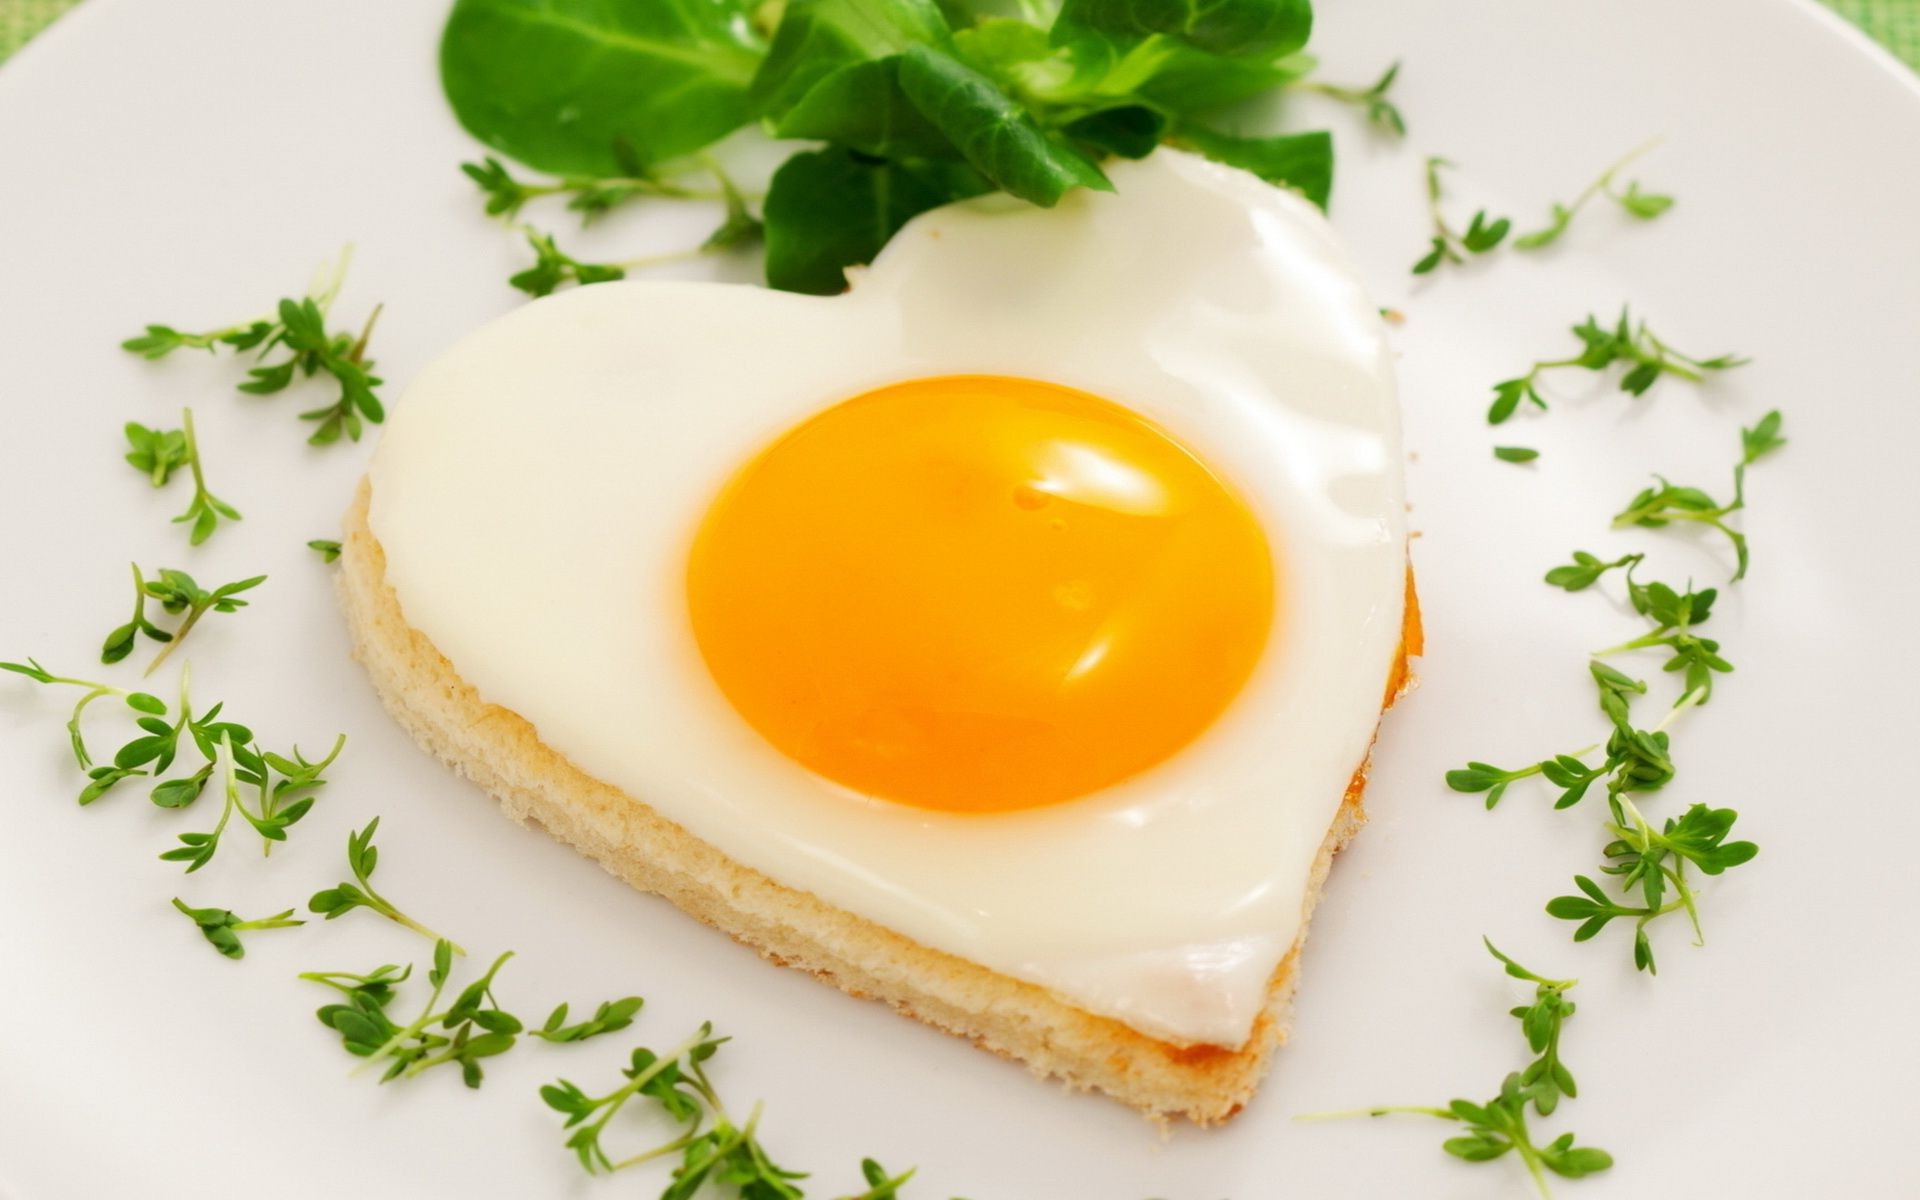 breakfast egg egg yolk food nutrition delicious toast dawn bread cooking lunch leaf meal dairy product butter healthy cholesterol health